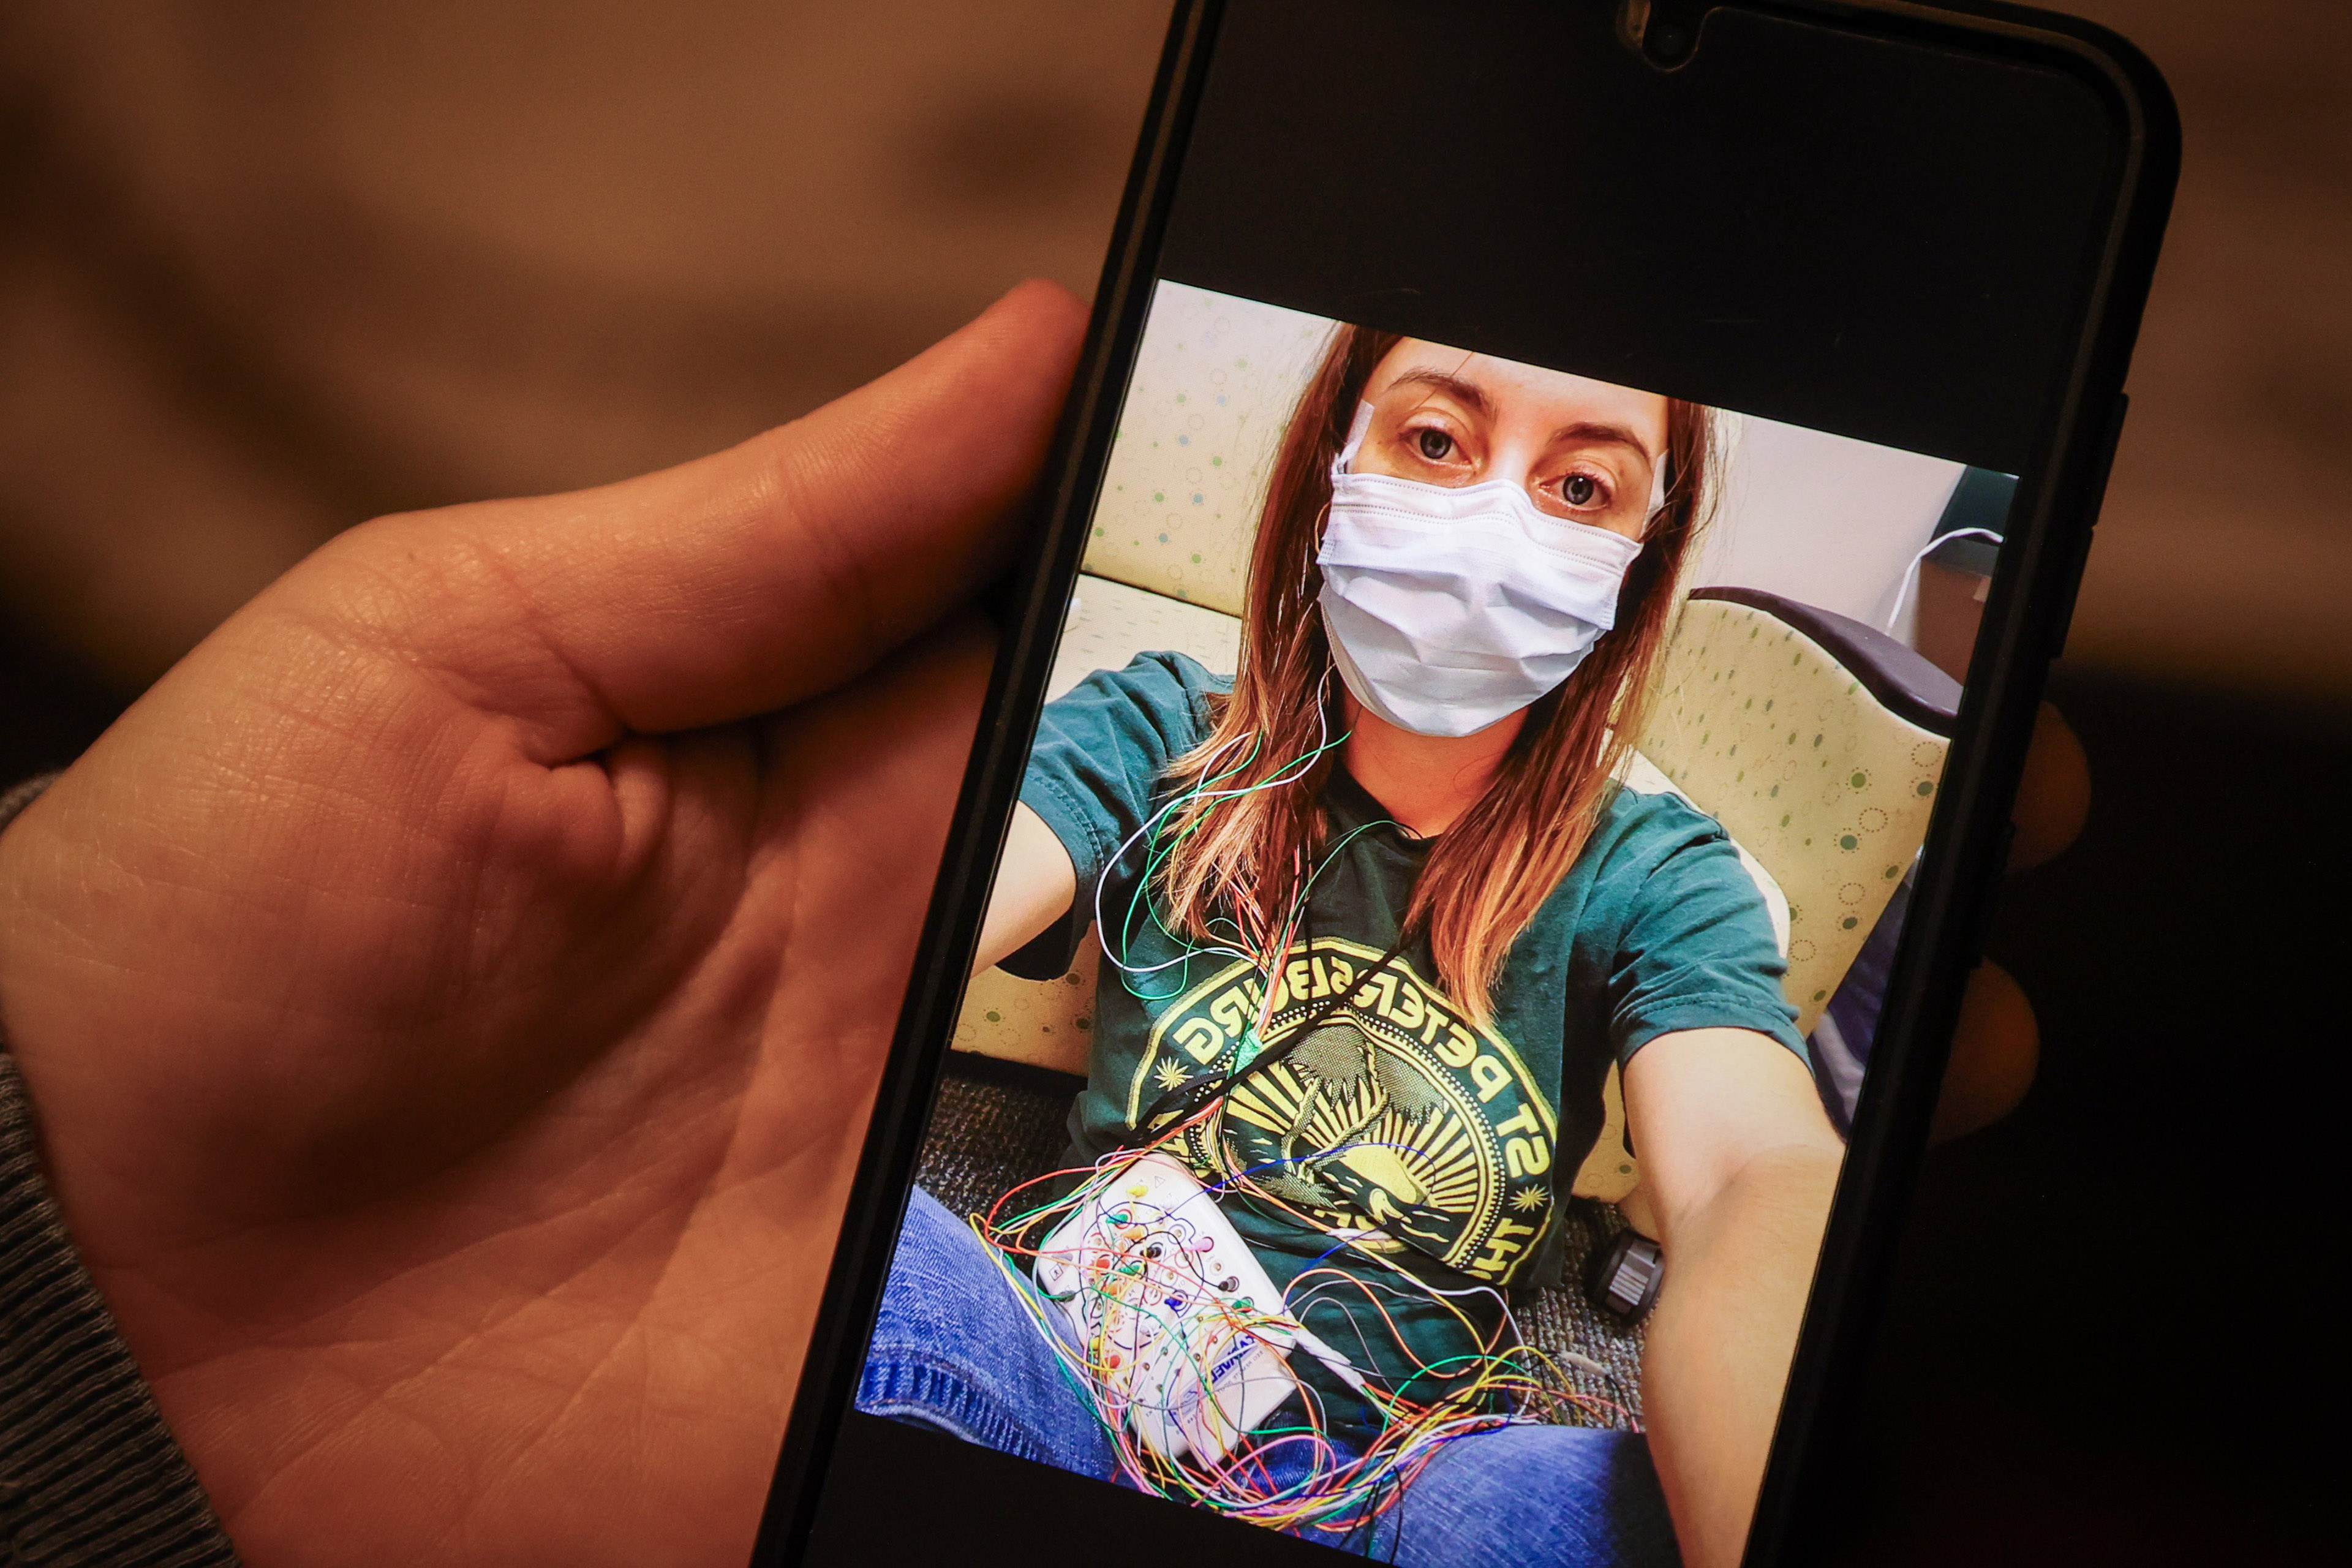 Nina Shand shows a photo of herself on her phone from when she was in a sleep study testing for narcolepsy. In the photo, she wears a surgical mask and is collected to many thin, colorful wires.